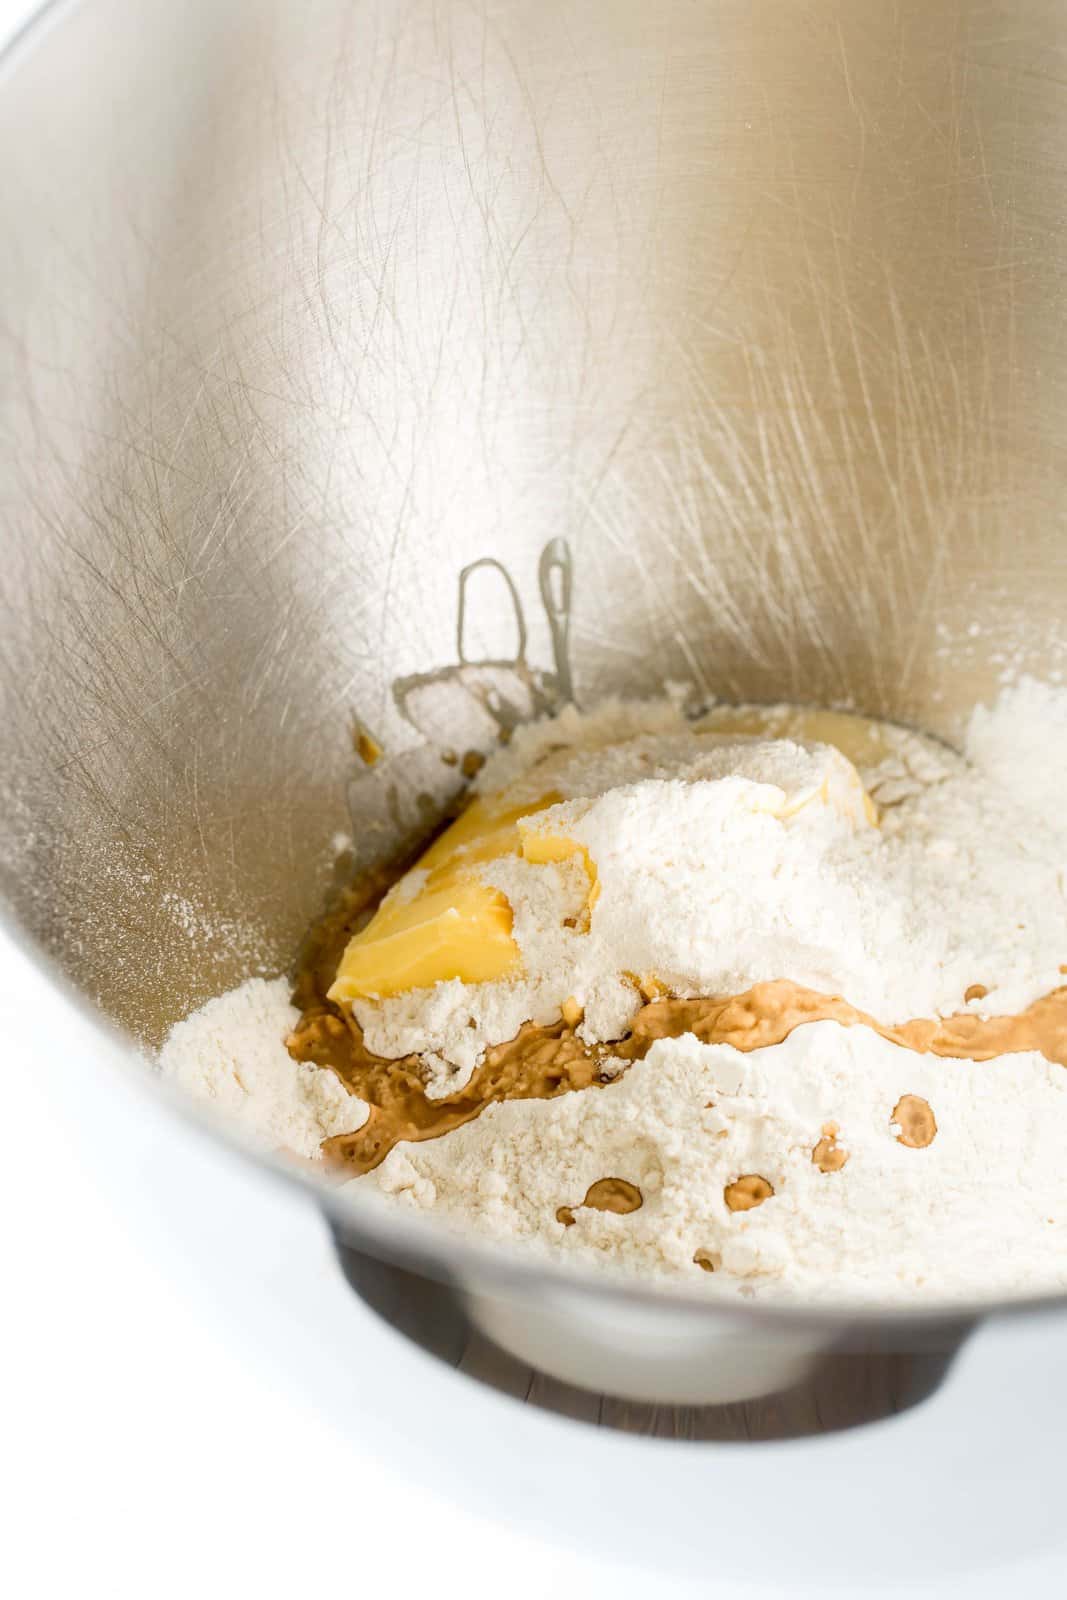 A mixing bowl with flour, vanilla, butter, salt and other things.